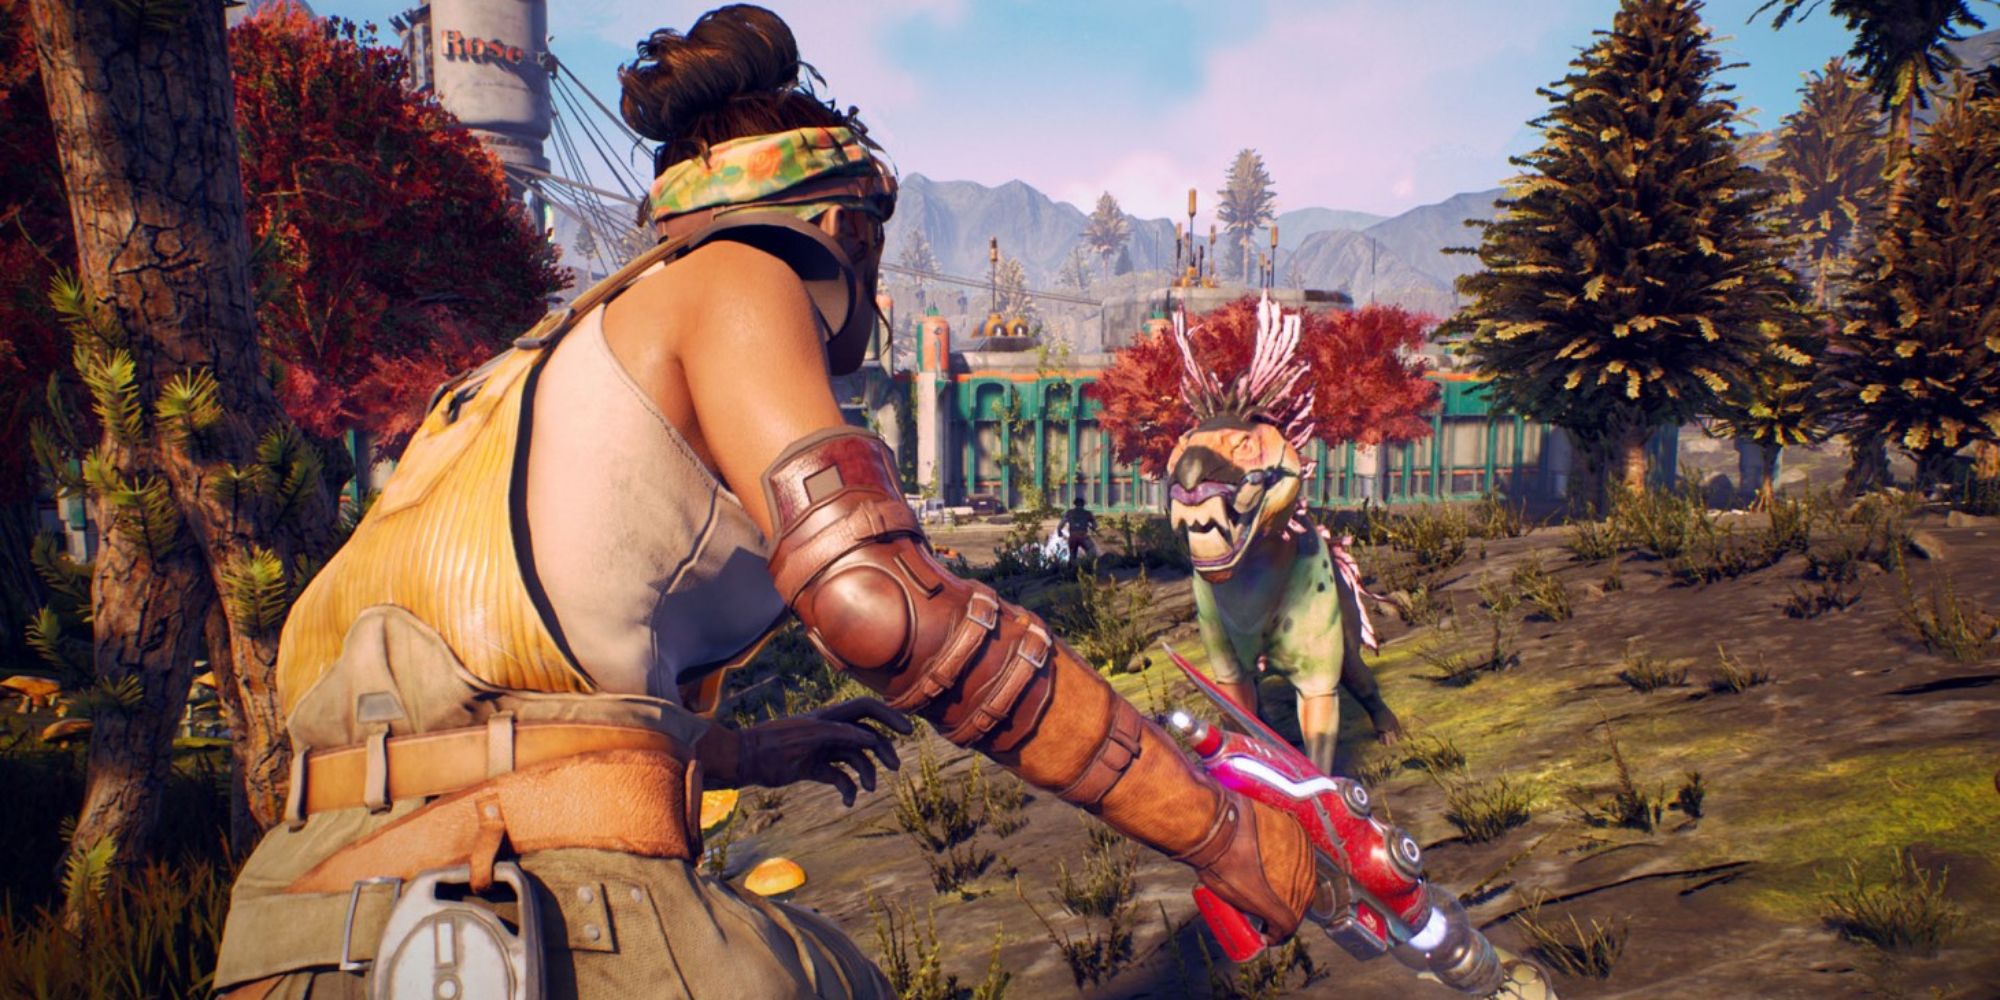 Screenshot from The Outer Worlds where Parvati fights alien creatures